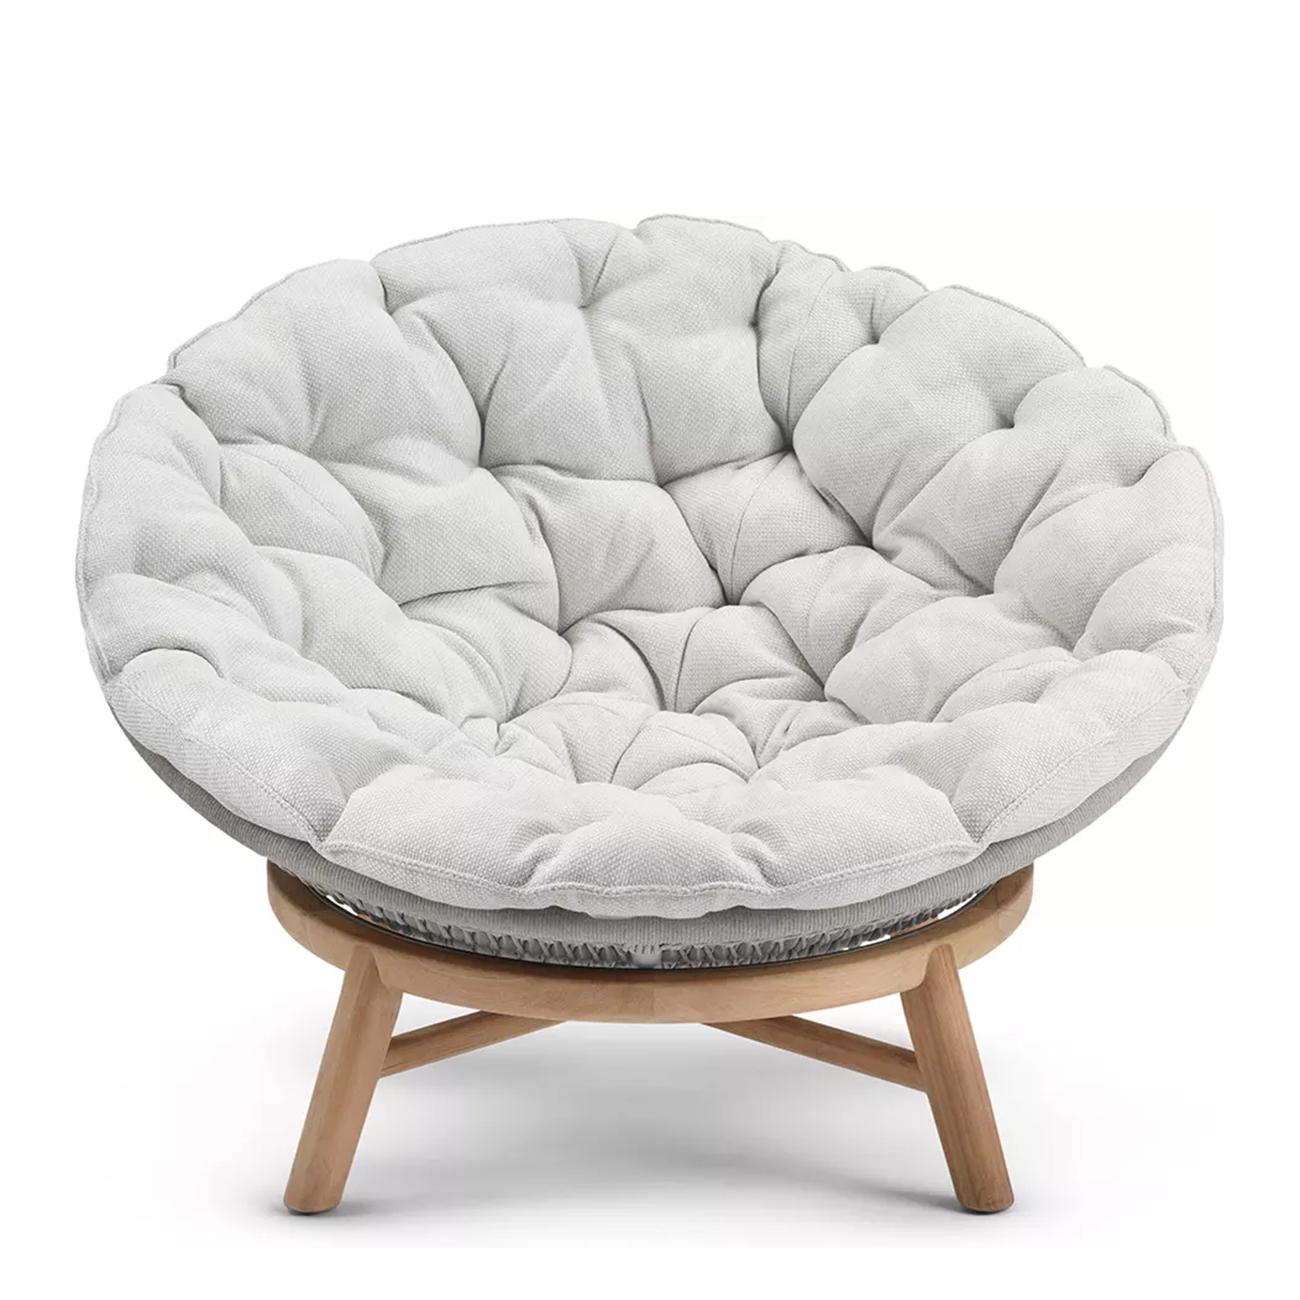 Daybed Lonam Natura with structure in solid teak in natural finish,
back seat structure in wicker and cord alliage in clear beige finish, 
with upholstered seat covered in cream outdoor fabric (Cat B.)